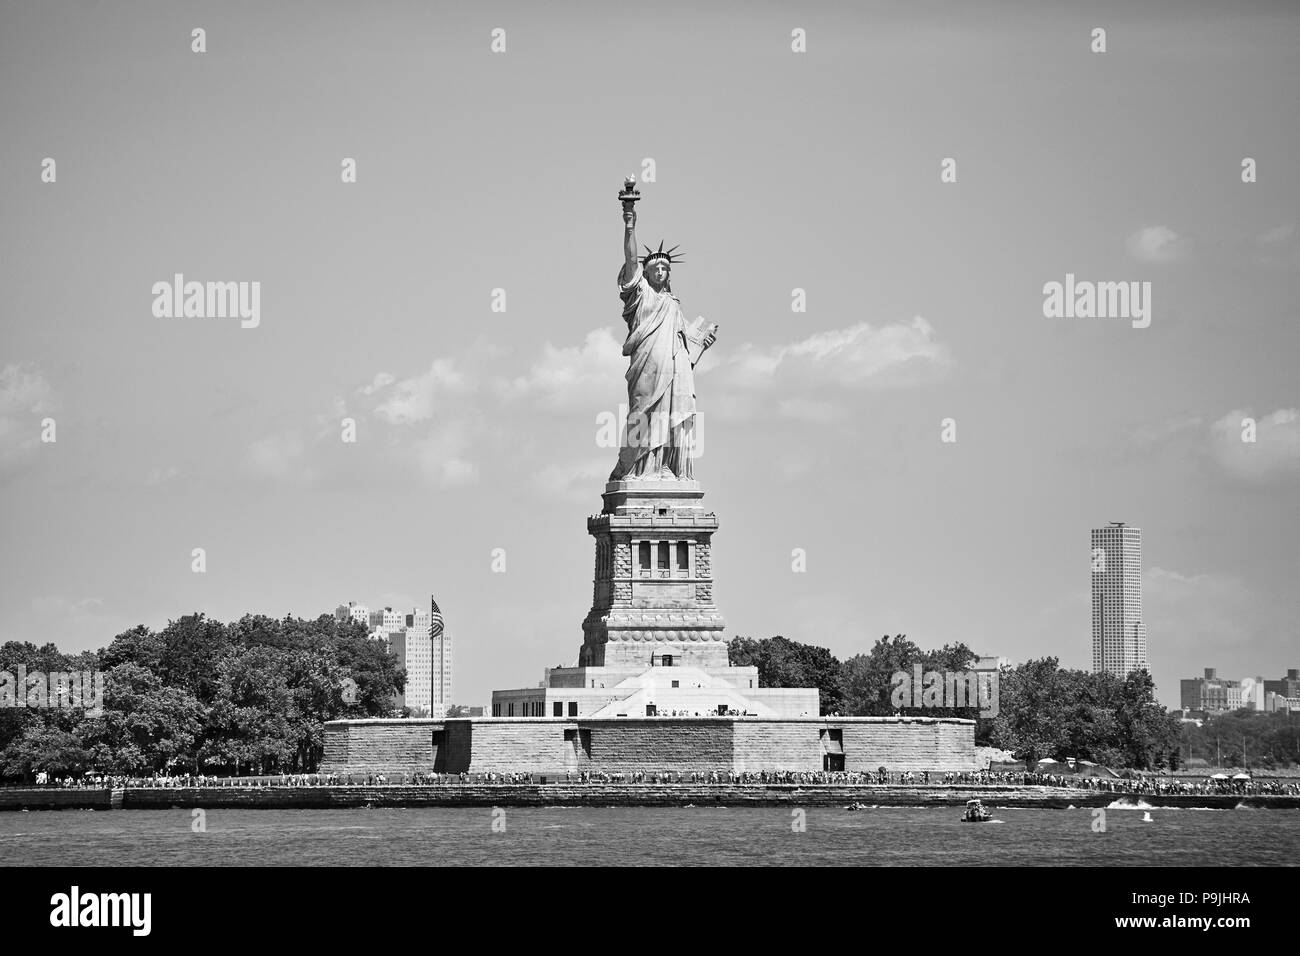 Black and white picture of the Statue of Liberty, New York, USA. Stock Photo